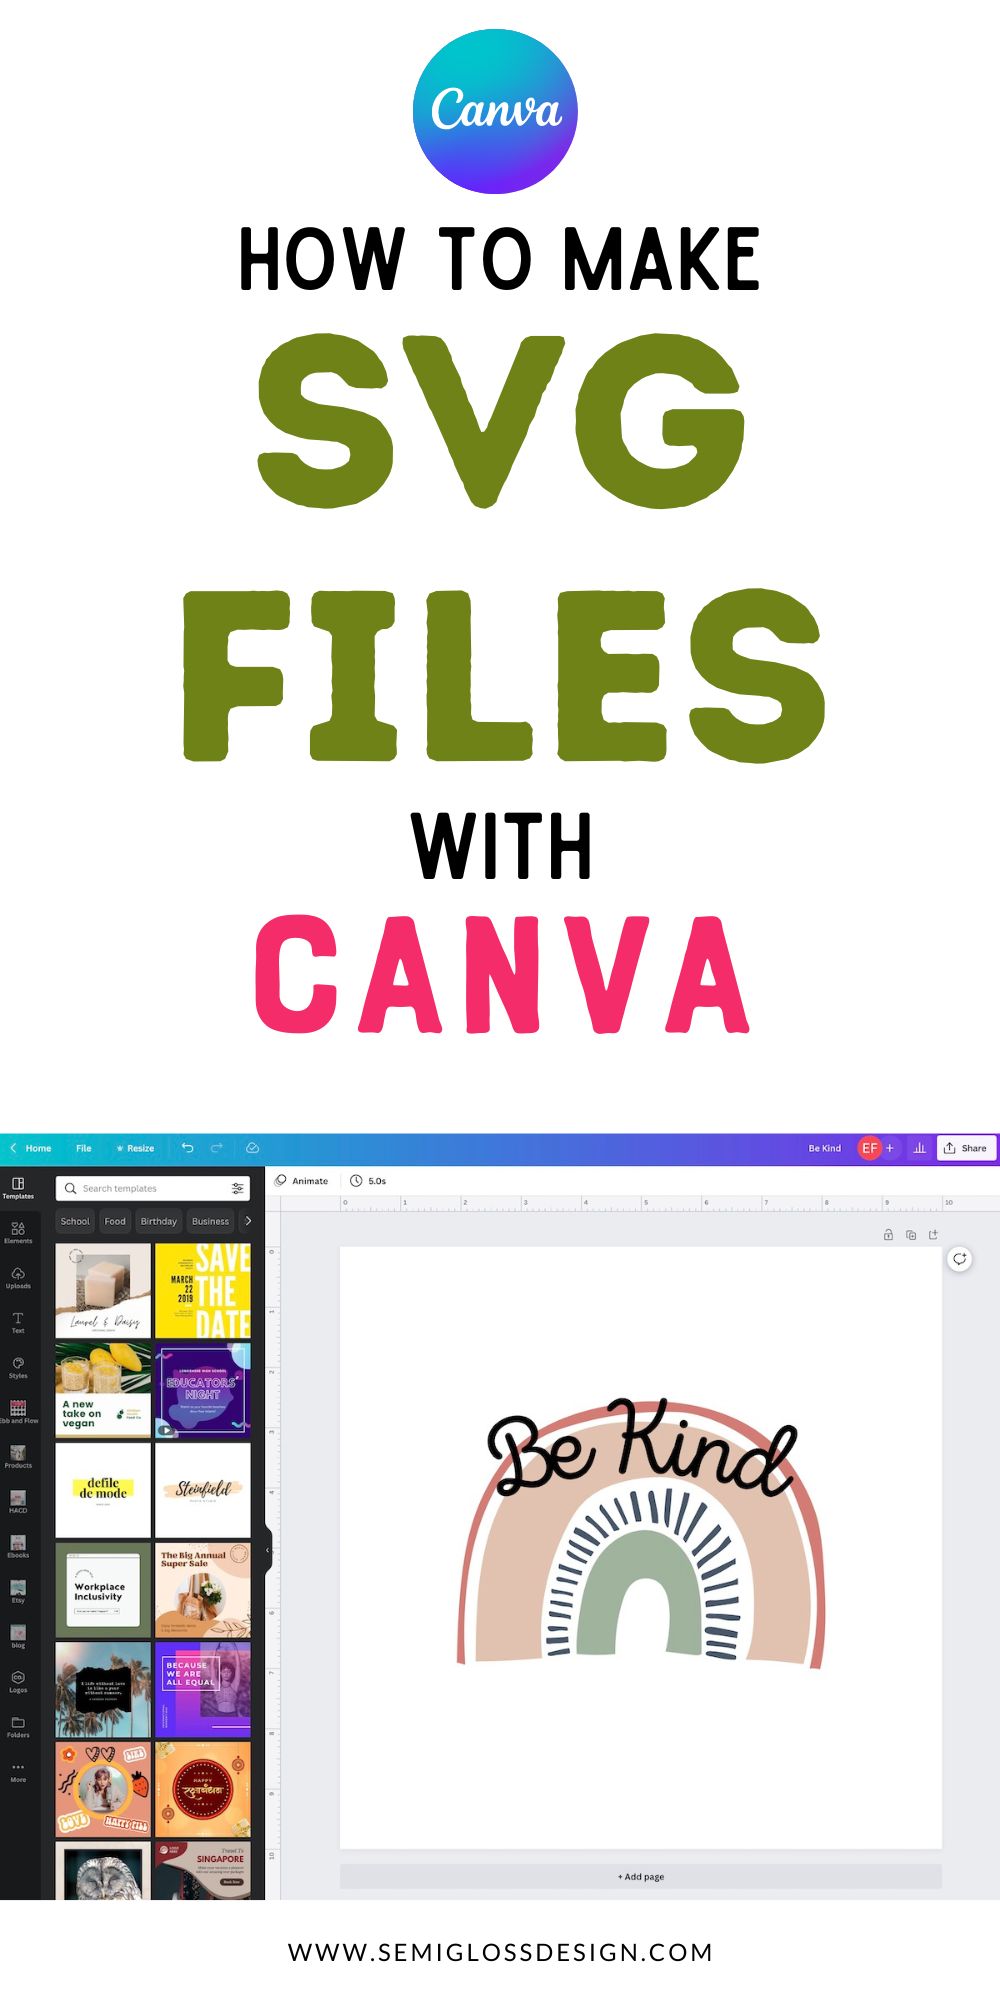 SVG Mastery: Creating SVG in Canva